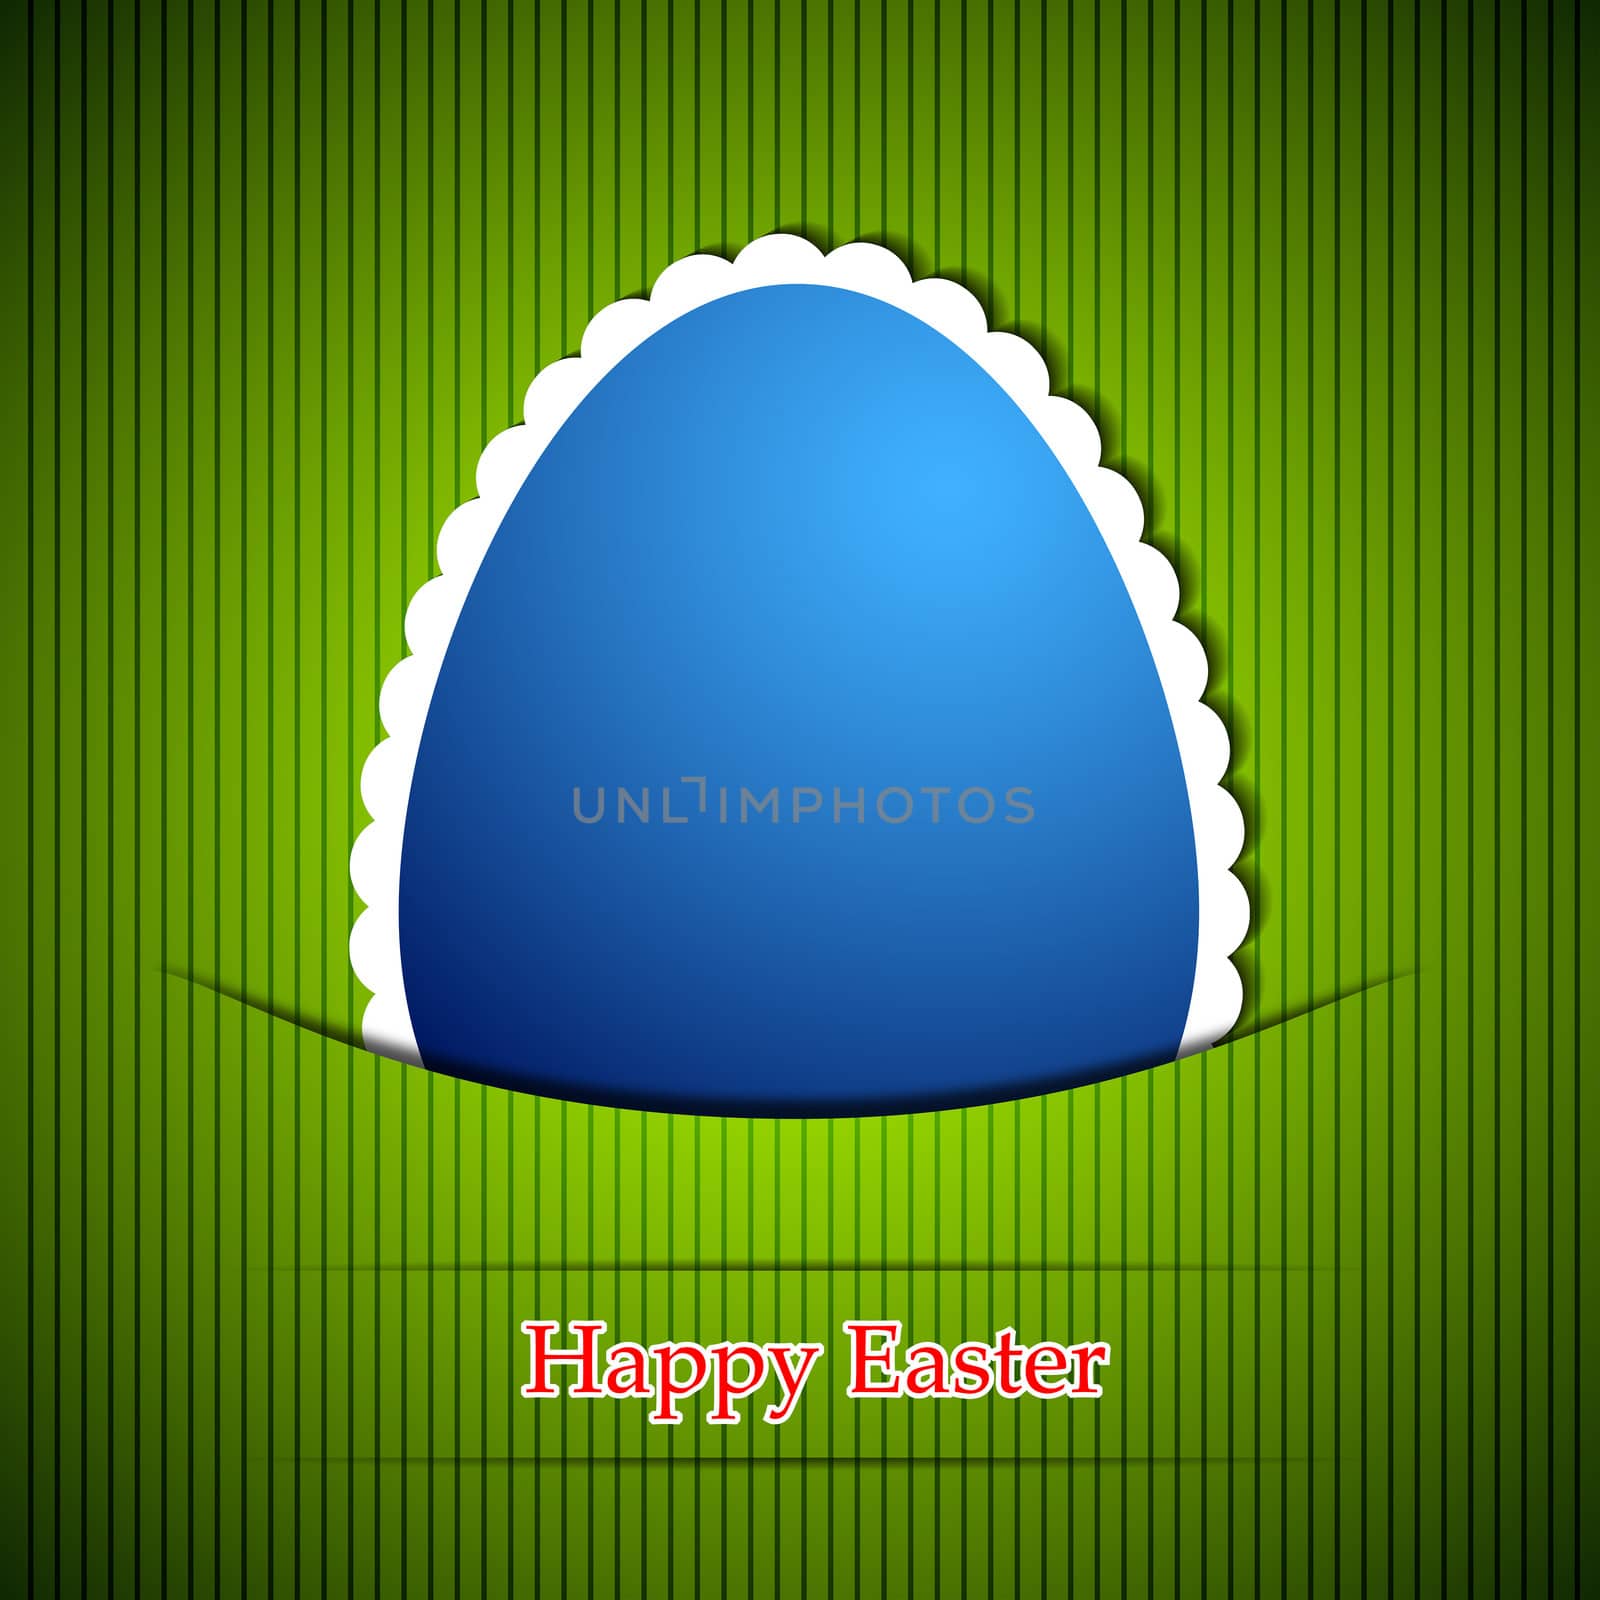 A blue ornate easter egg on a green background